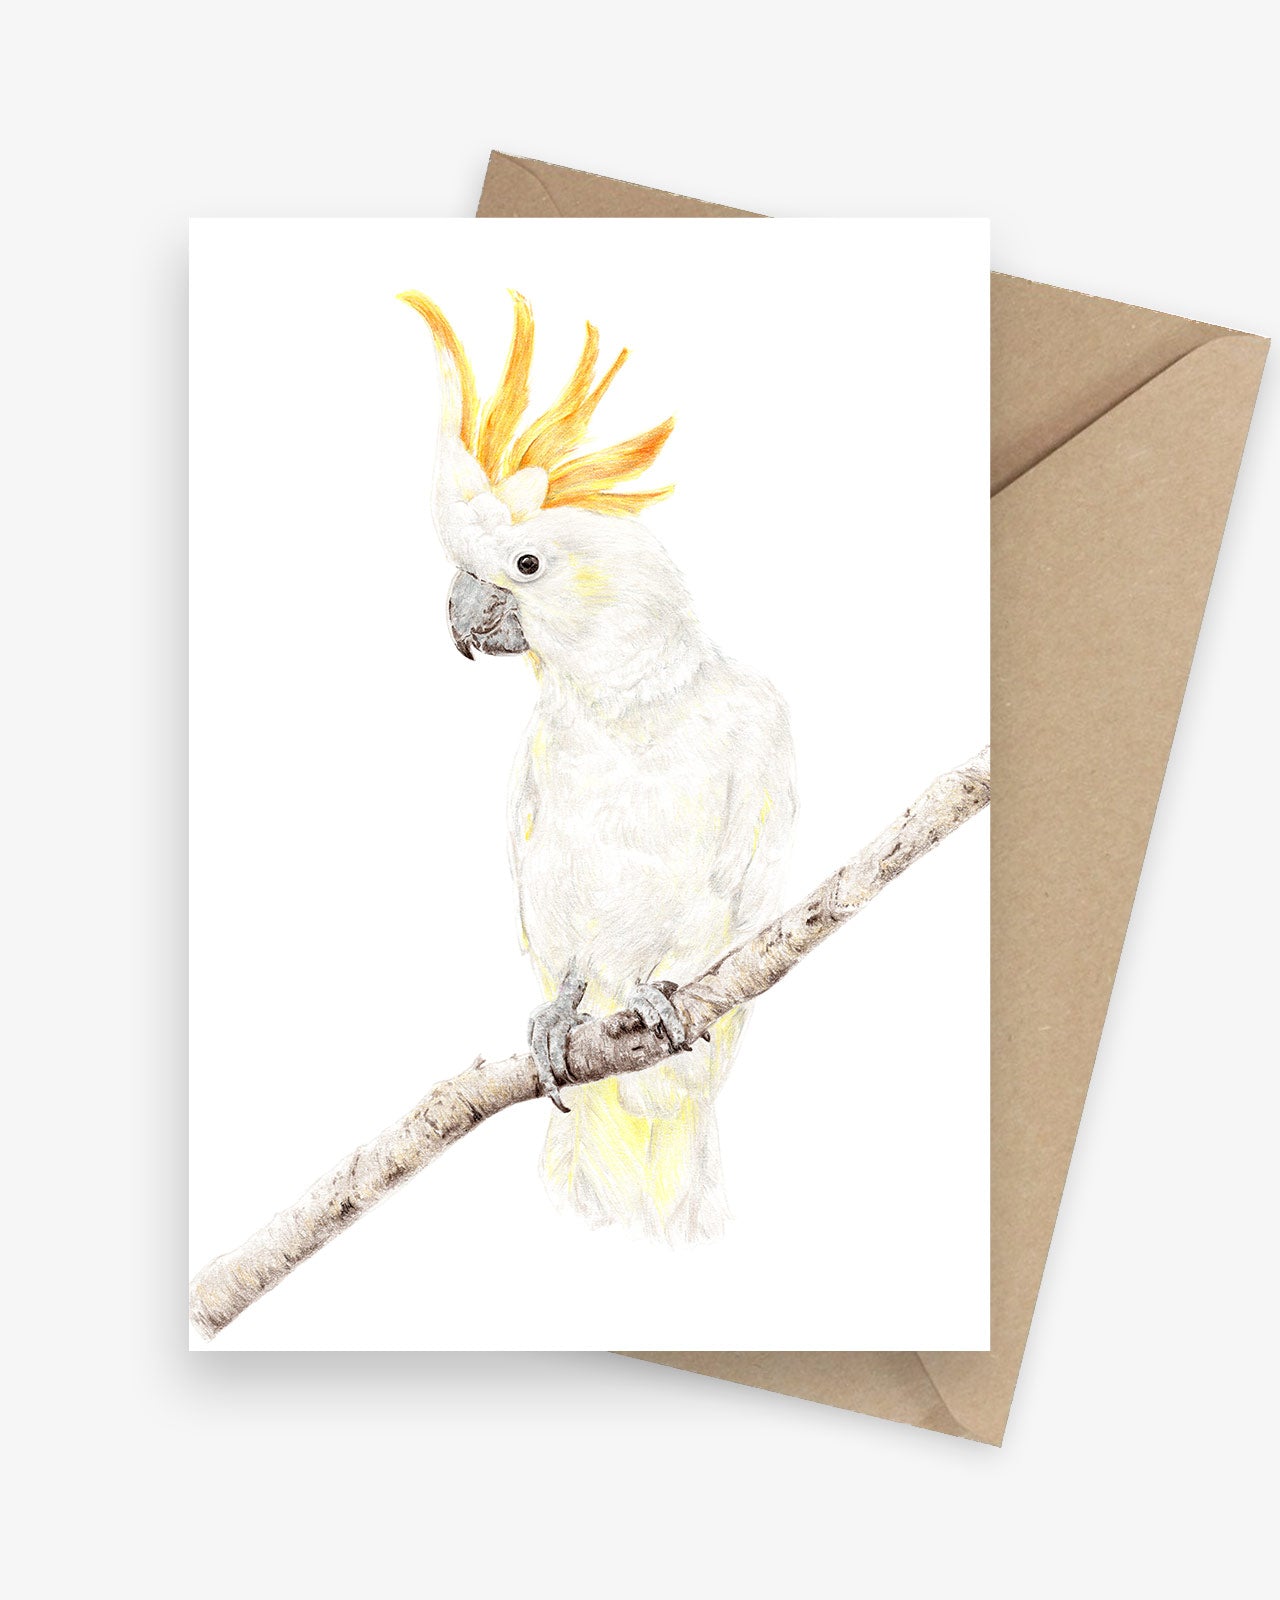 Greeting card featuring an Australian yellow-crested cockatoo.